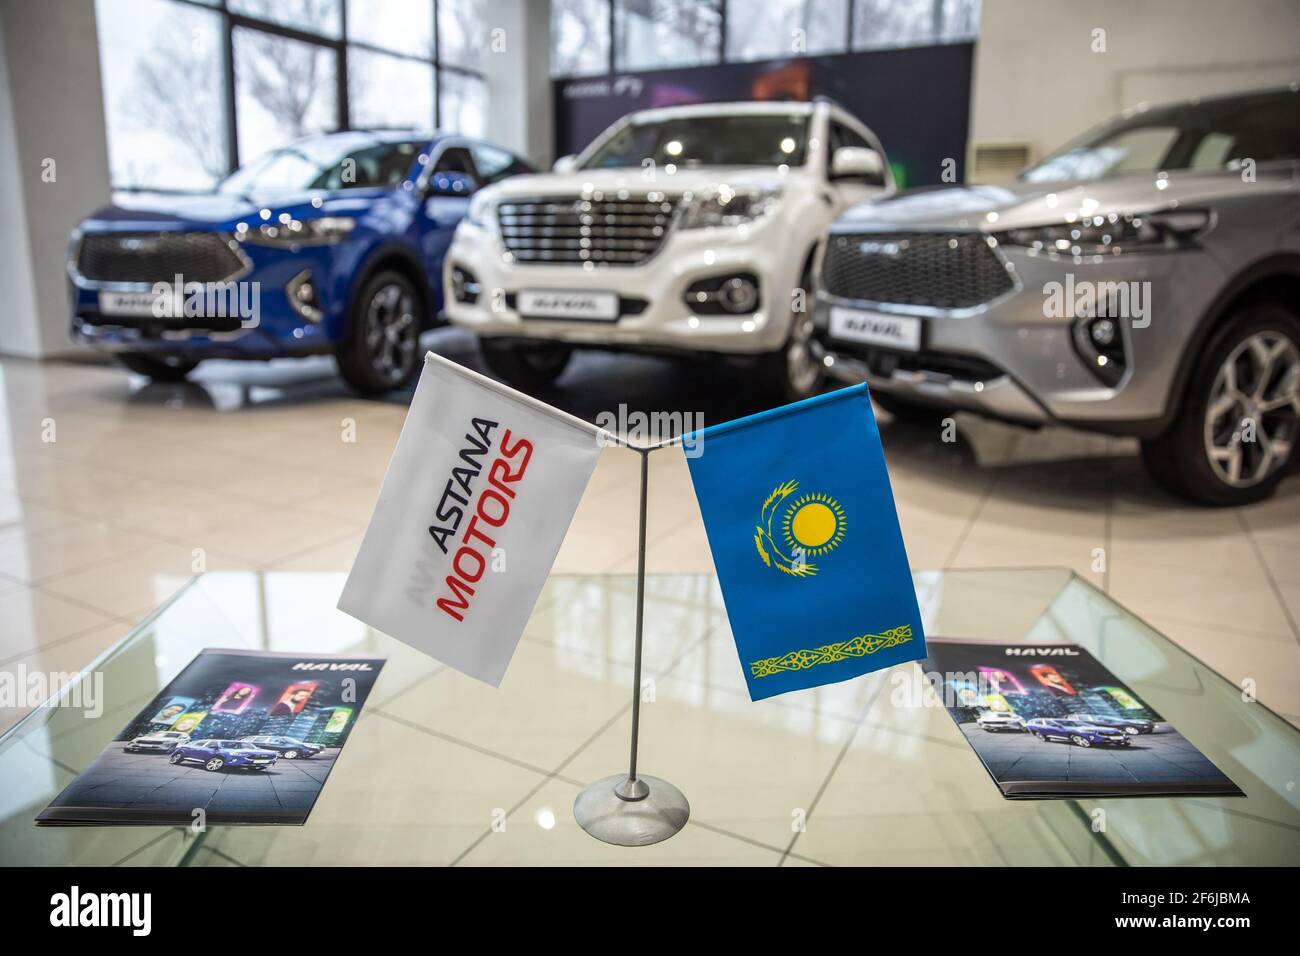 (210401) -- ALMATY, April 1, 2021 (Xinhua) -- Photo taken on April 1, 2021 shows HAVAL cars at a dealer shop in Almaty, Kazakhstan. Great Wall Motor Co., Ltd.'s HAVAL brand entered the Kazakhstan market on thursday, three main models of crossover vehicles F7, F7x and off-road vehicle H9 officially began the sales to Kazakhstan residents in Almaty. (Astana Motors/Handout via Xinhua) Stock Photo